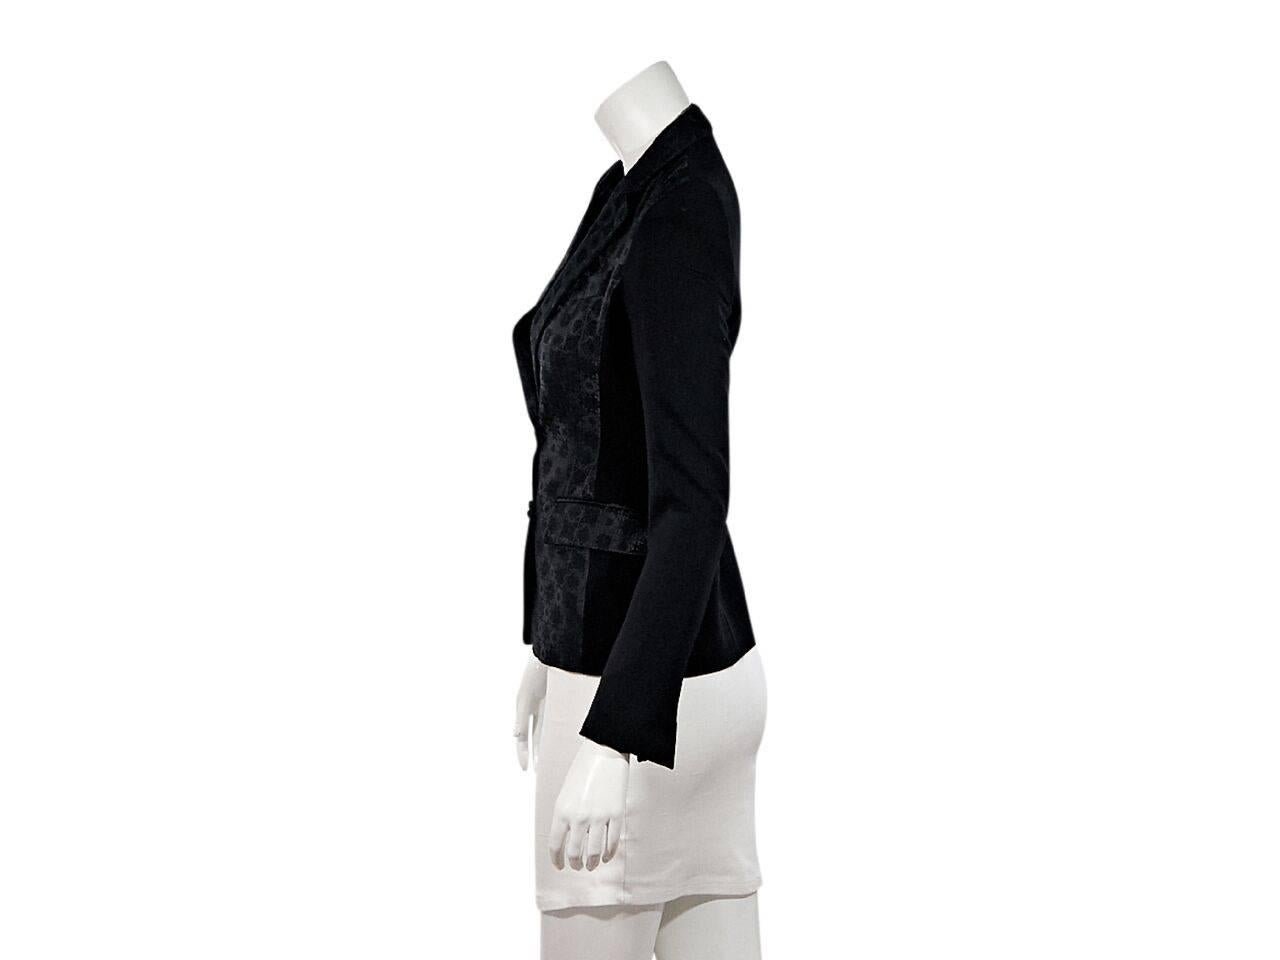 Product details:  Black jacquard-front blazer by Stella McCartney.  Notched lapel.  Long sleeves.  Button-front closure.  
Condition: Pre-owned. Very good.
Est. Retail $ 798.00